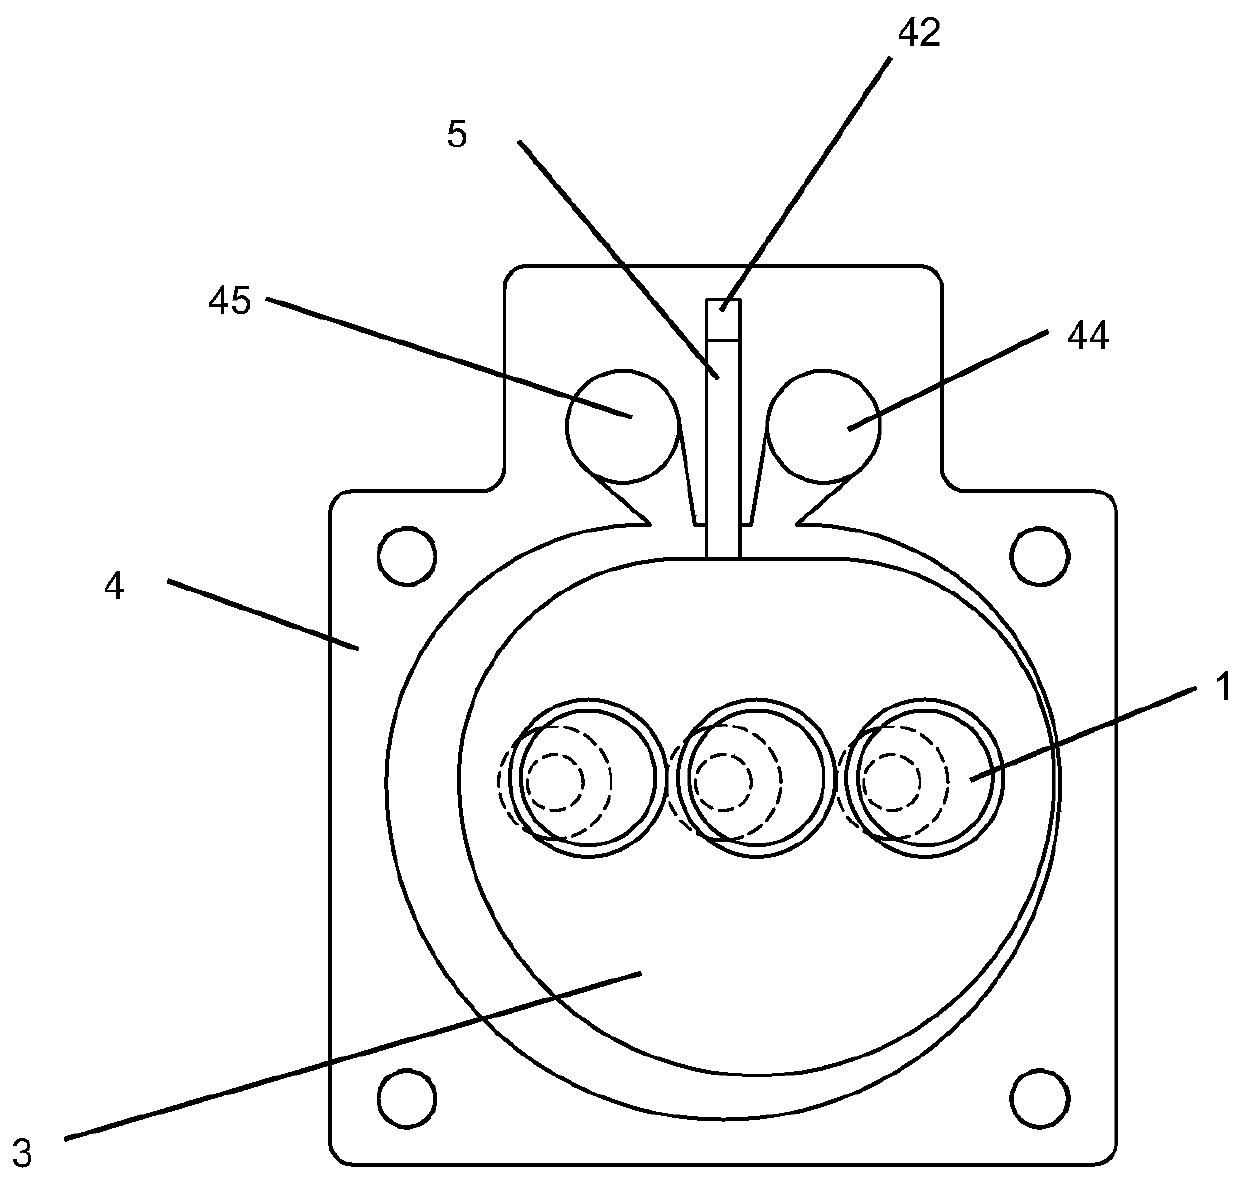 Eccentric shaft type translational rotor pump and engine